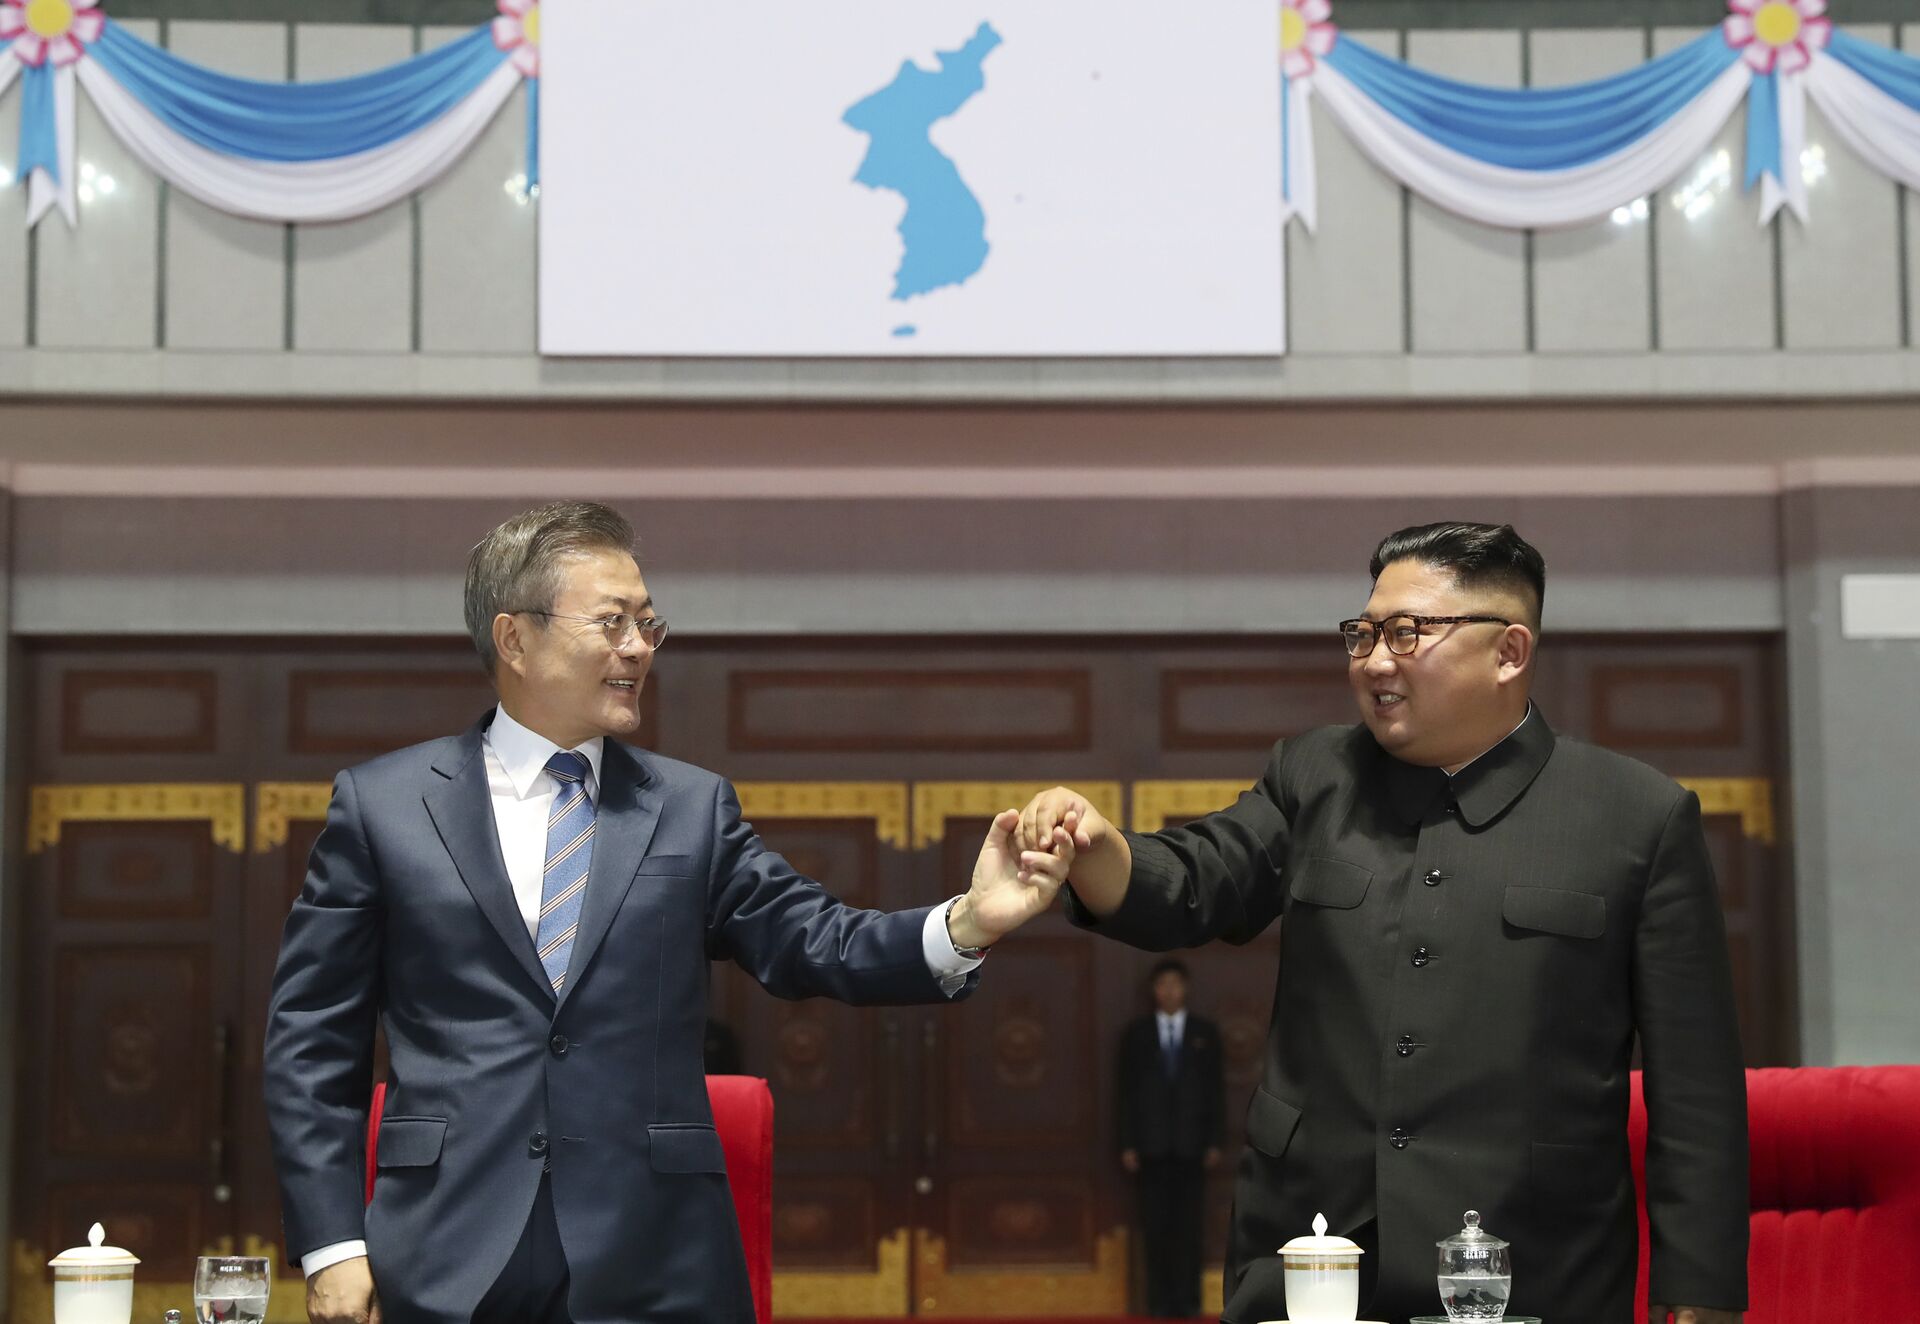 South Korean President Moon Jae-in, left, and North Korean leader Kim Jong Un hold their hands after watching the mass games performance of The Glorious Country at May Day Stadium in Pyongyang, North Korea, Wednesday, Sept. 19, 2018. Unification flag symbol at top centre. - Sputnik International, 1920, 22.04.2022